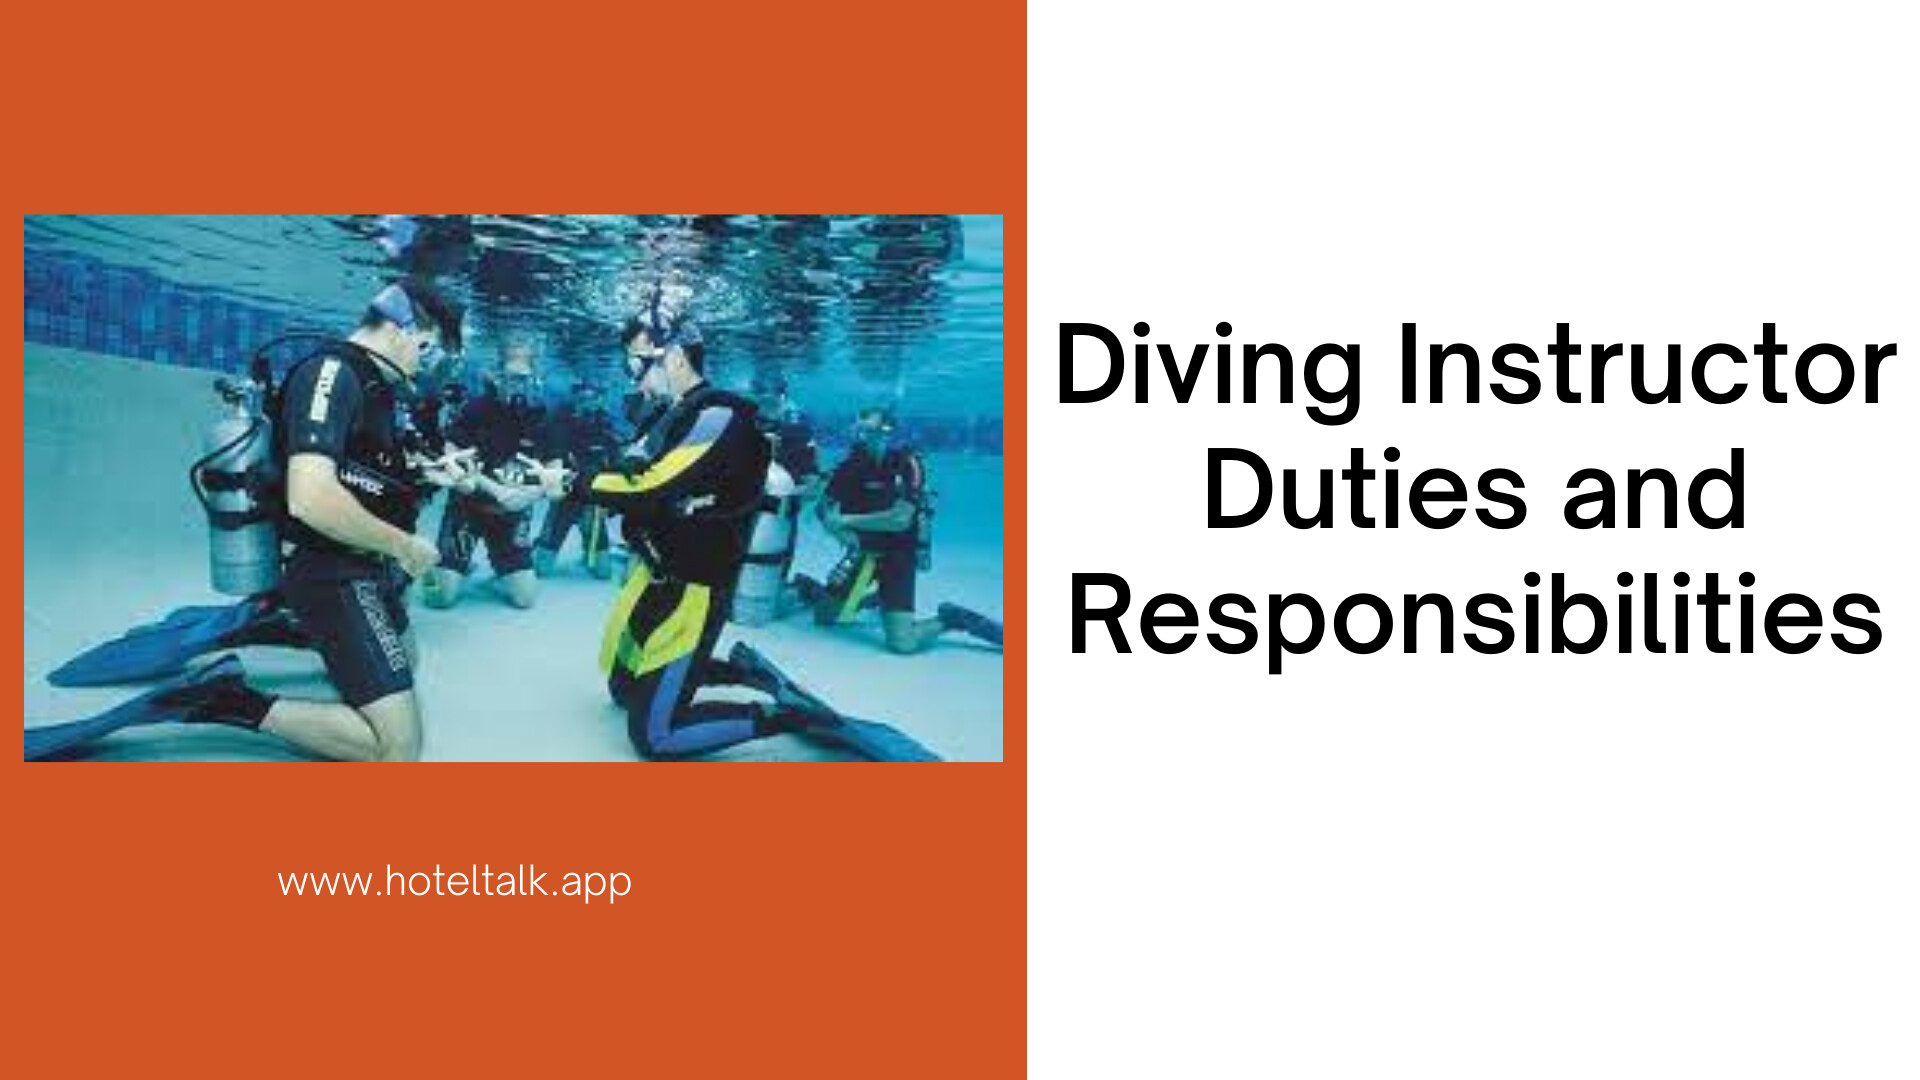 Diving Instructor Duties and Responsibilities